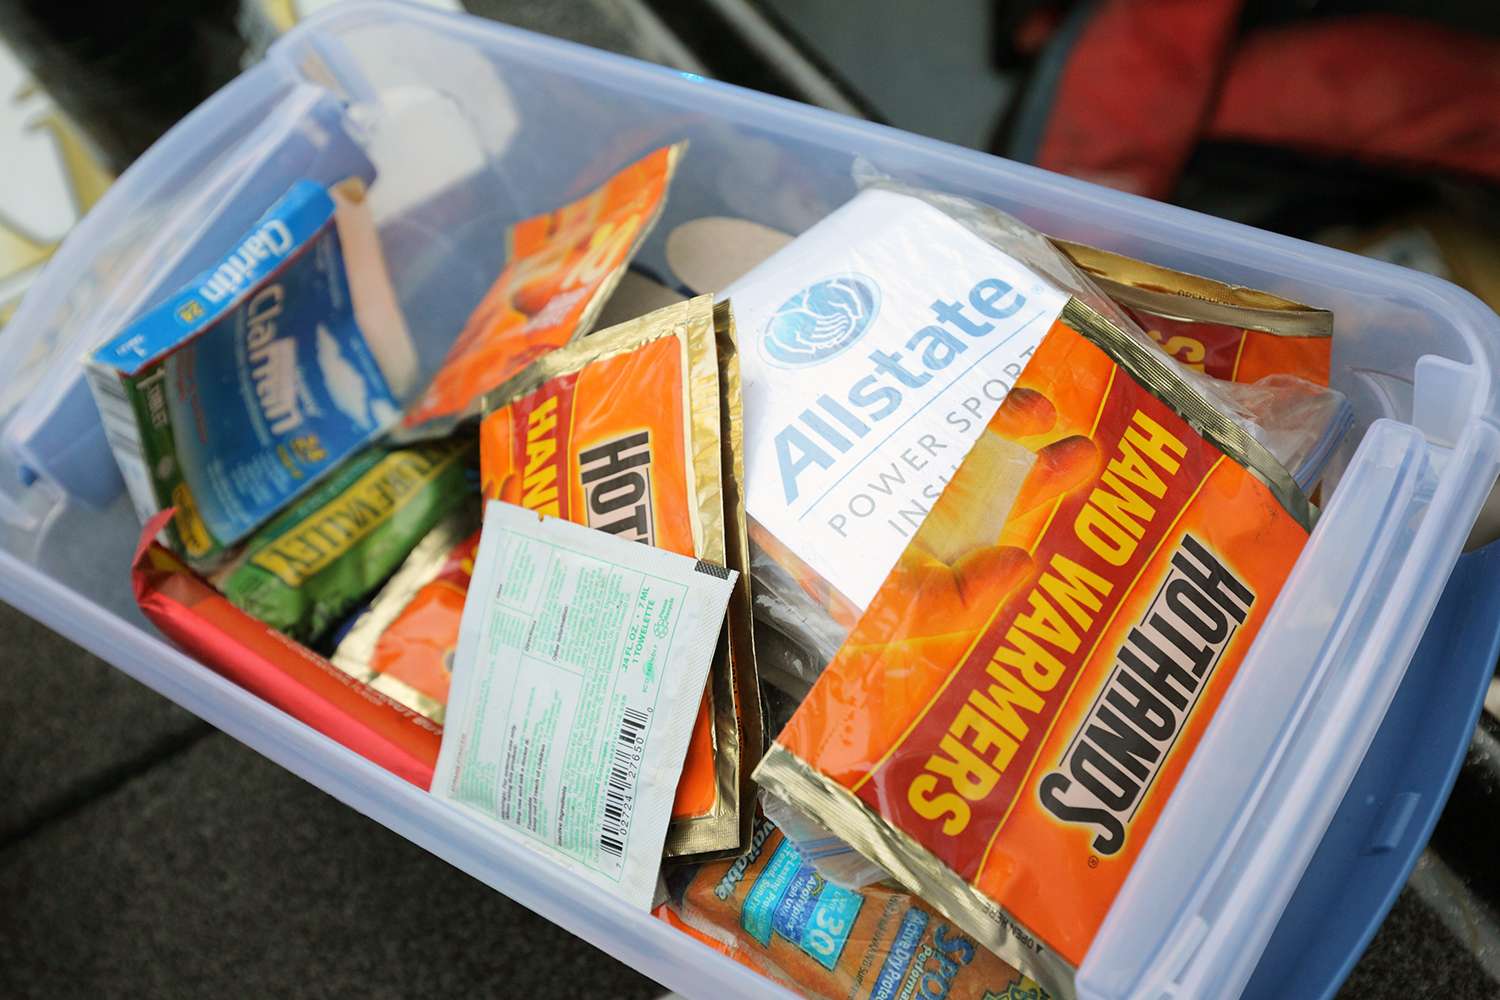 Other survival items here included hand warmers, snack bars and different medicines.